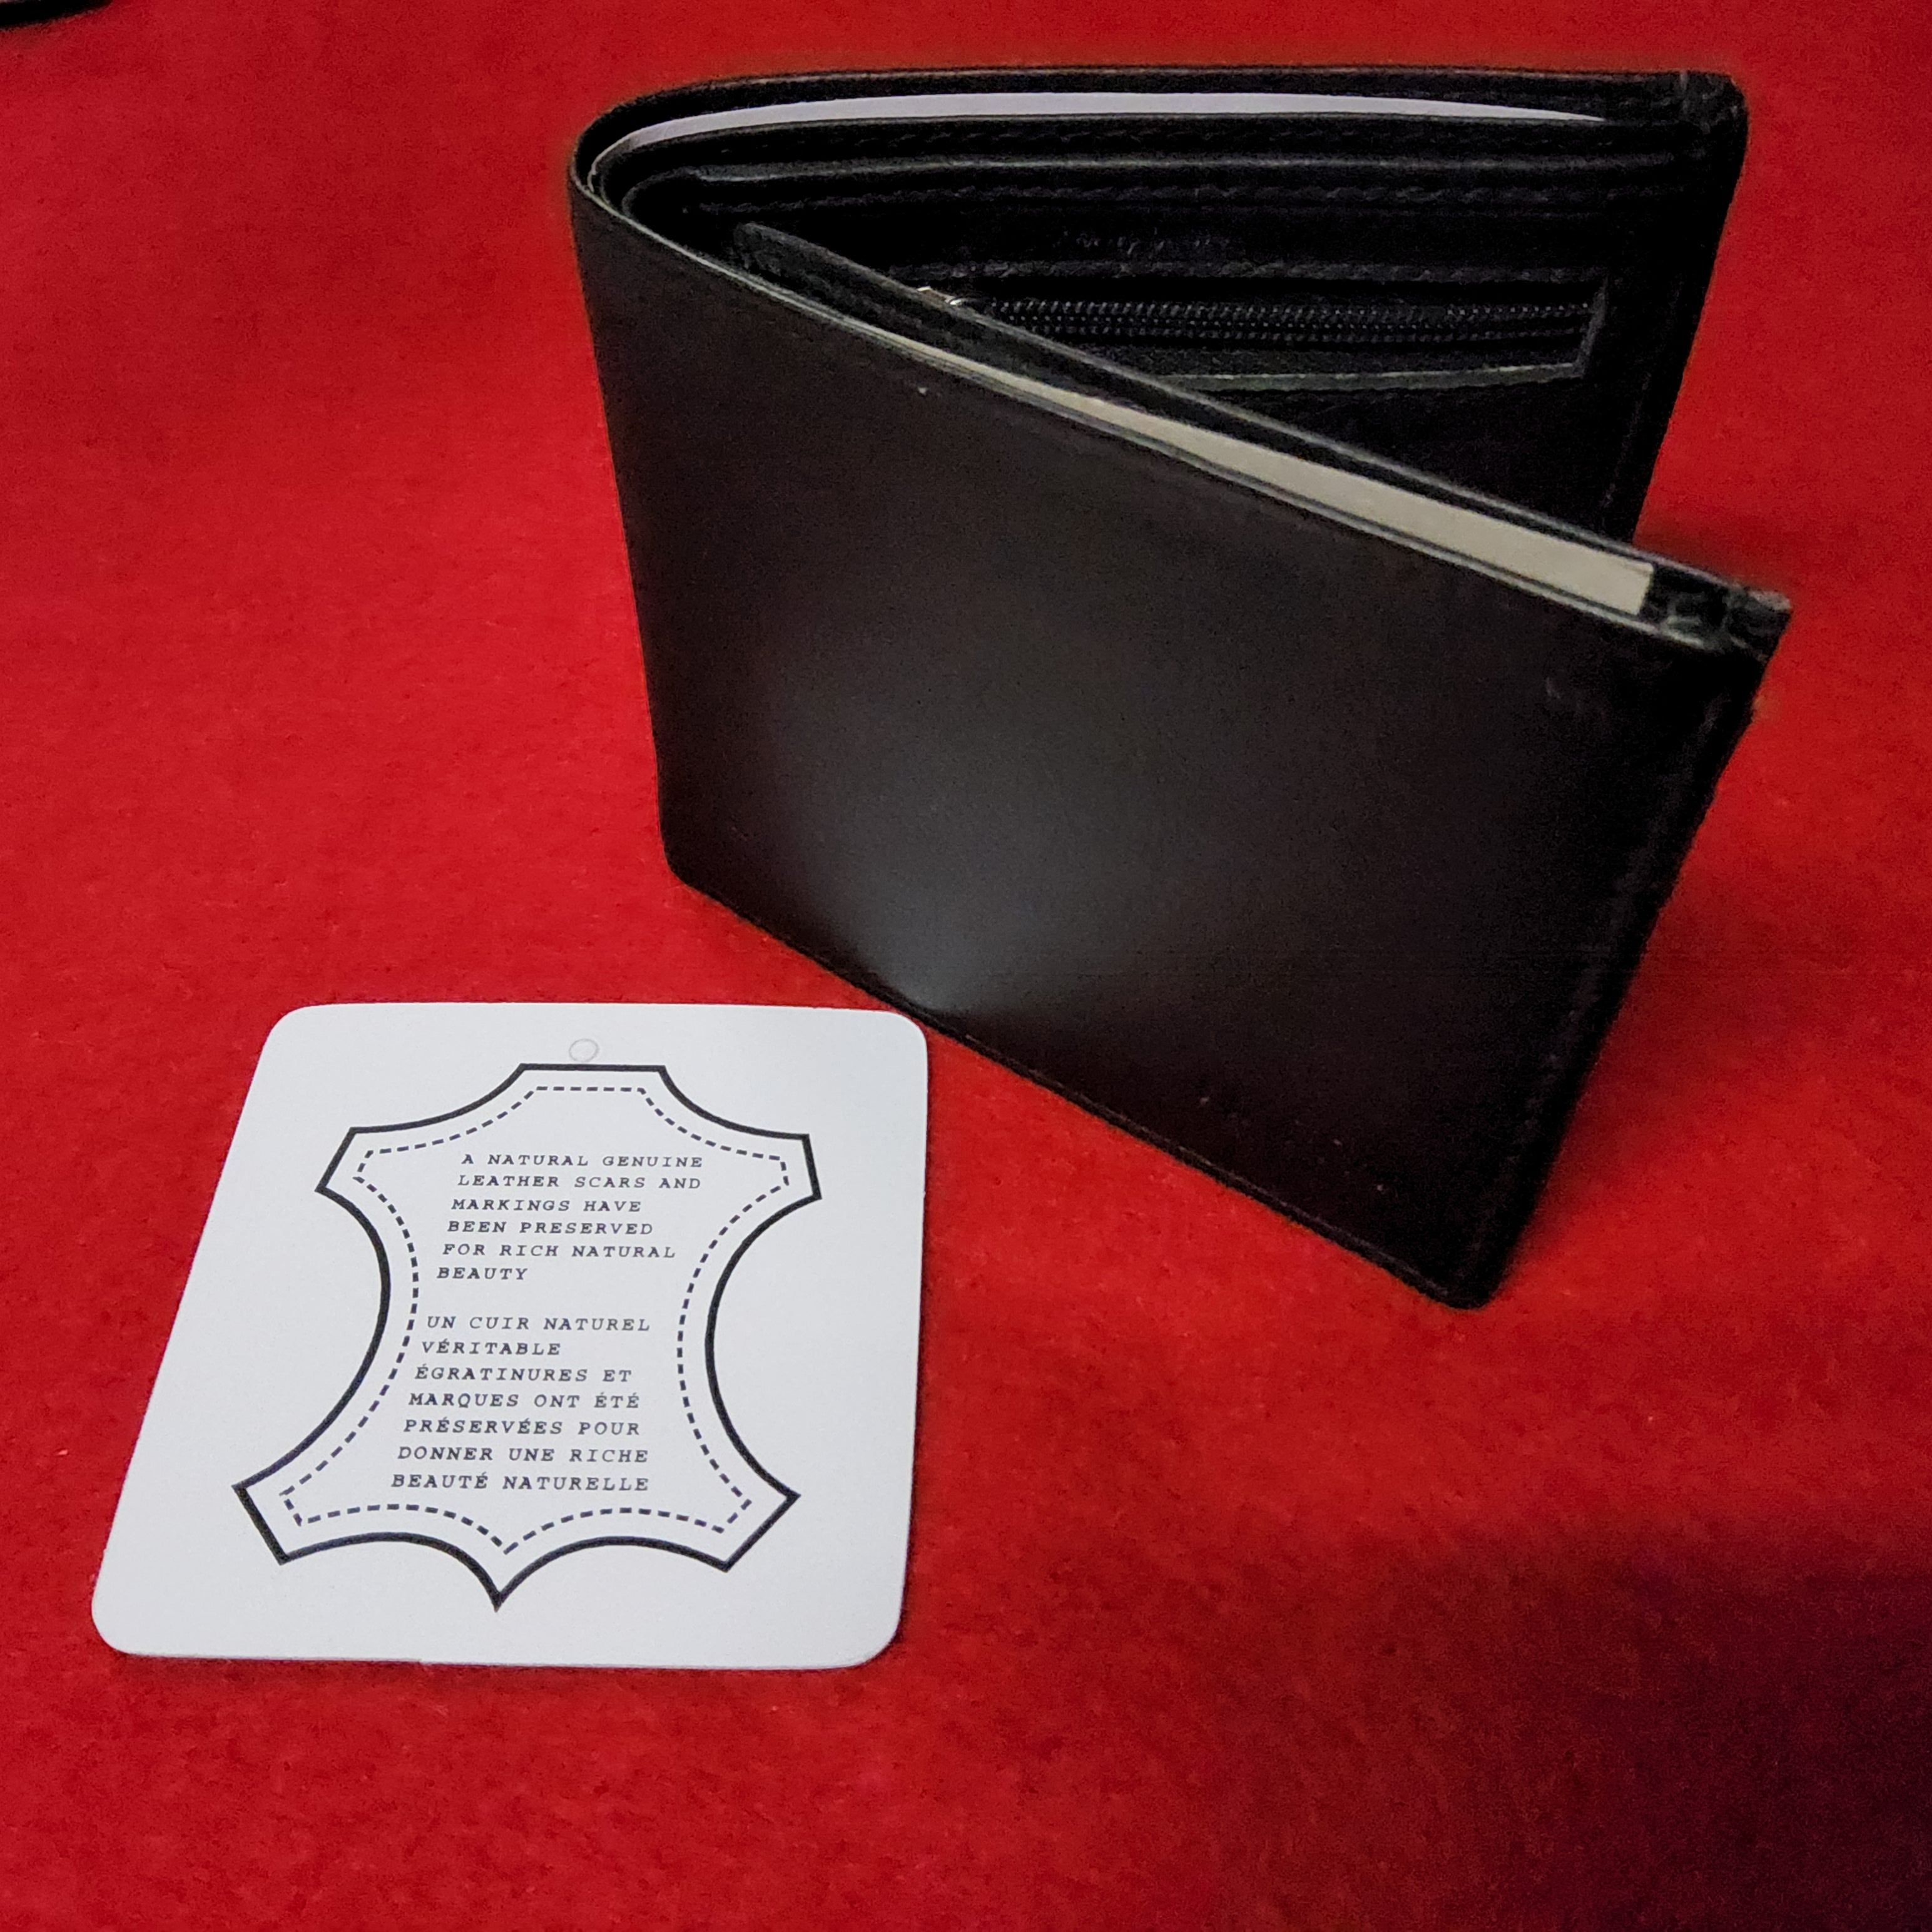 NAPPA Leather Wallet - Carry it All Wallet - RFID Identity Block - Has Zippered Change Purse - Colour options